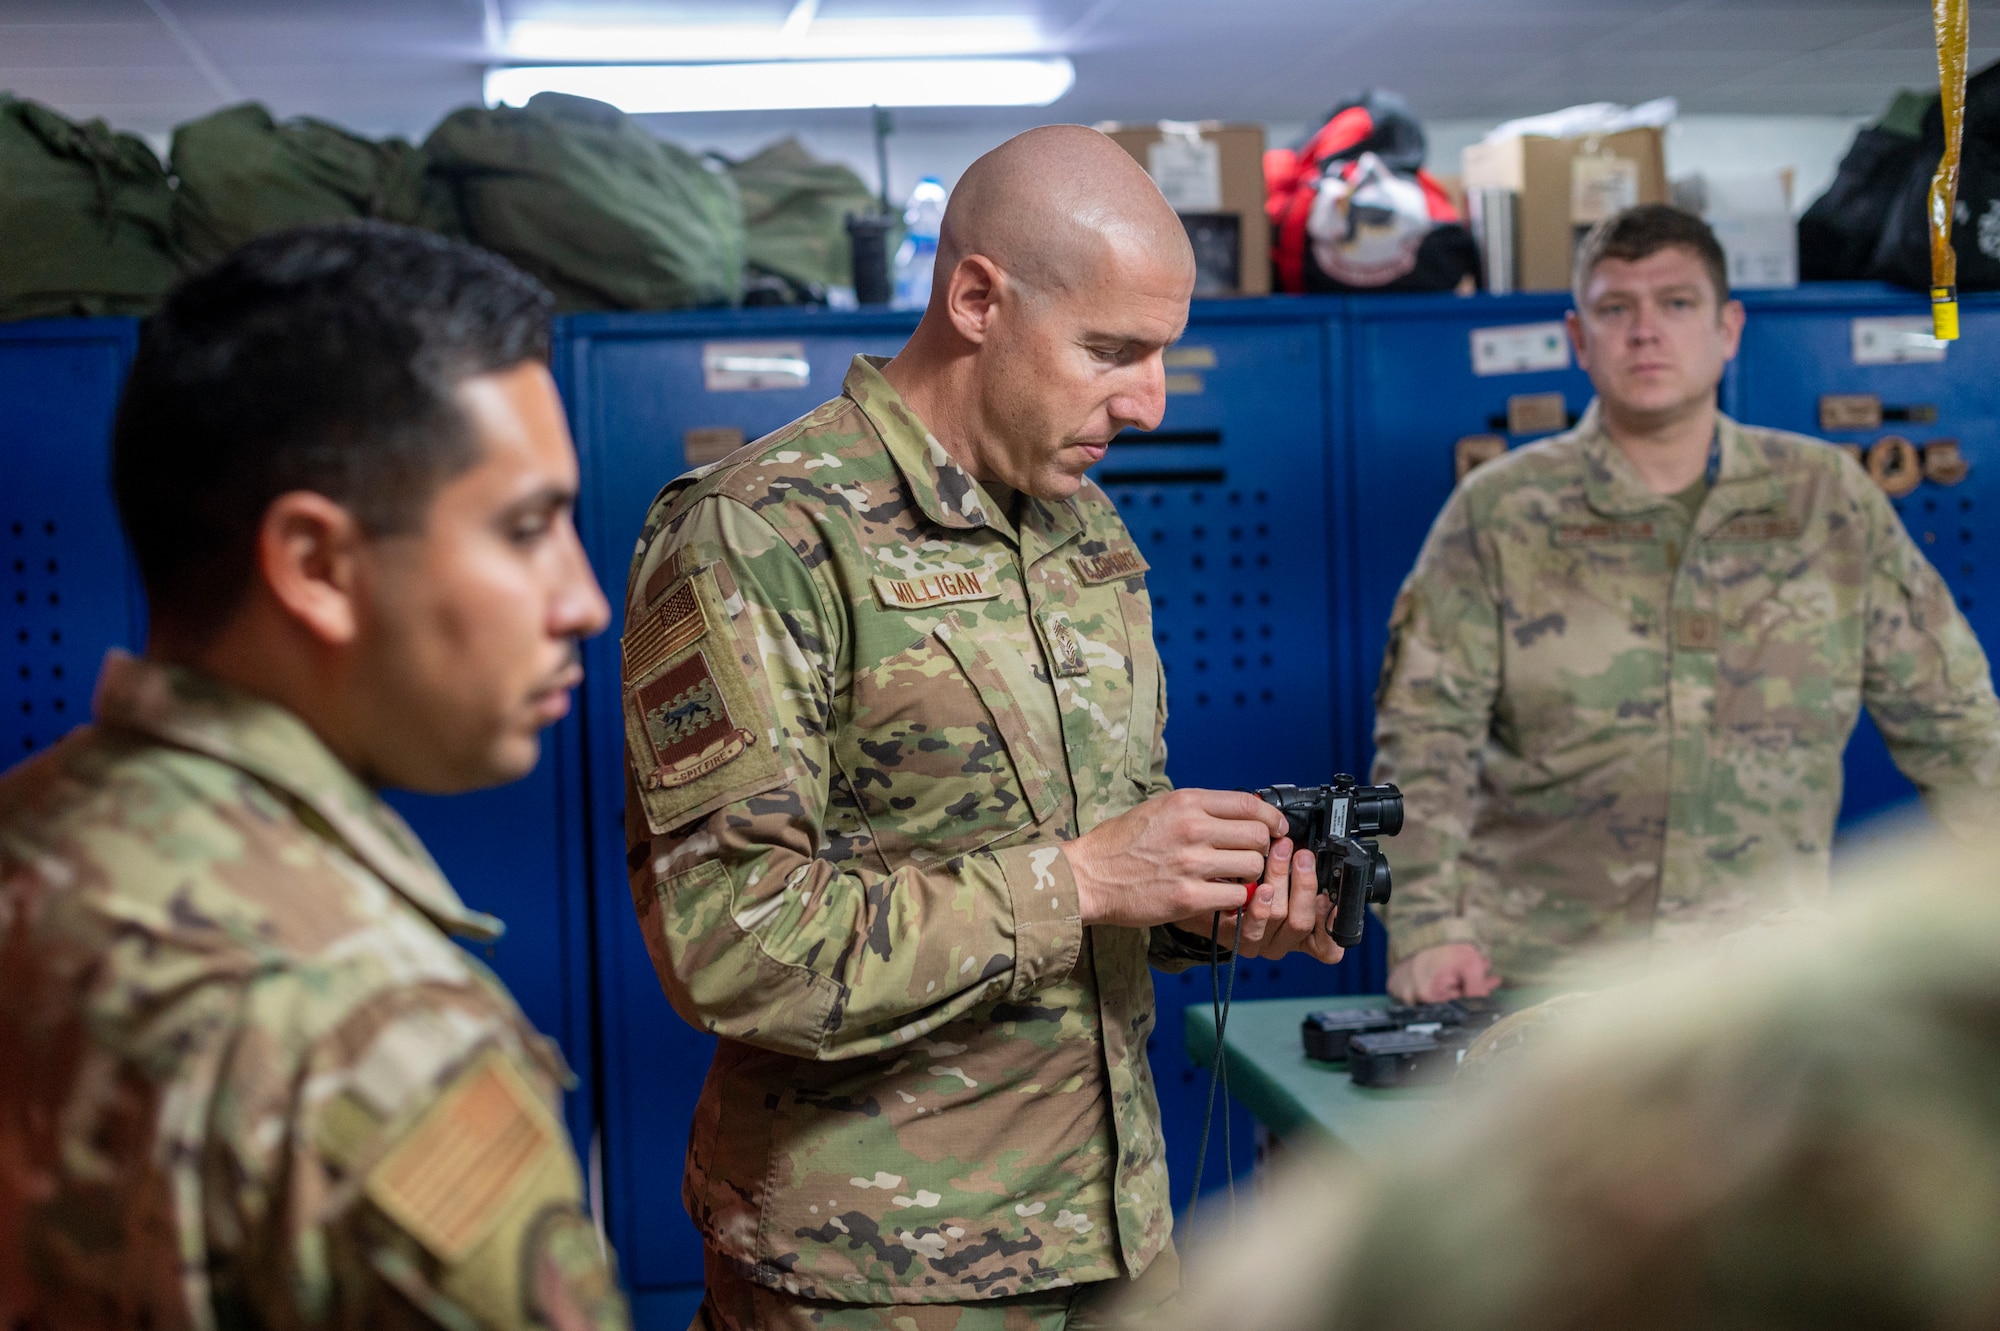 U.S. Air Force Chief Master Sgt. Sean Milligan, 332nd Air Expeditionary Wing command chief, meets with Airmen from the 26th Expeditionary Rescue Squadron Sept. 18, 2021, at an undisclosed location somewhere in Southwest Asia.